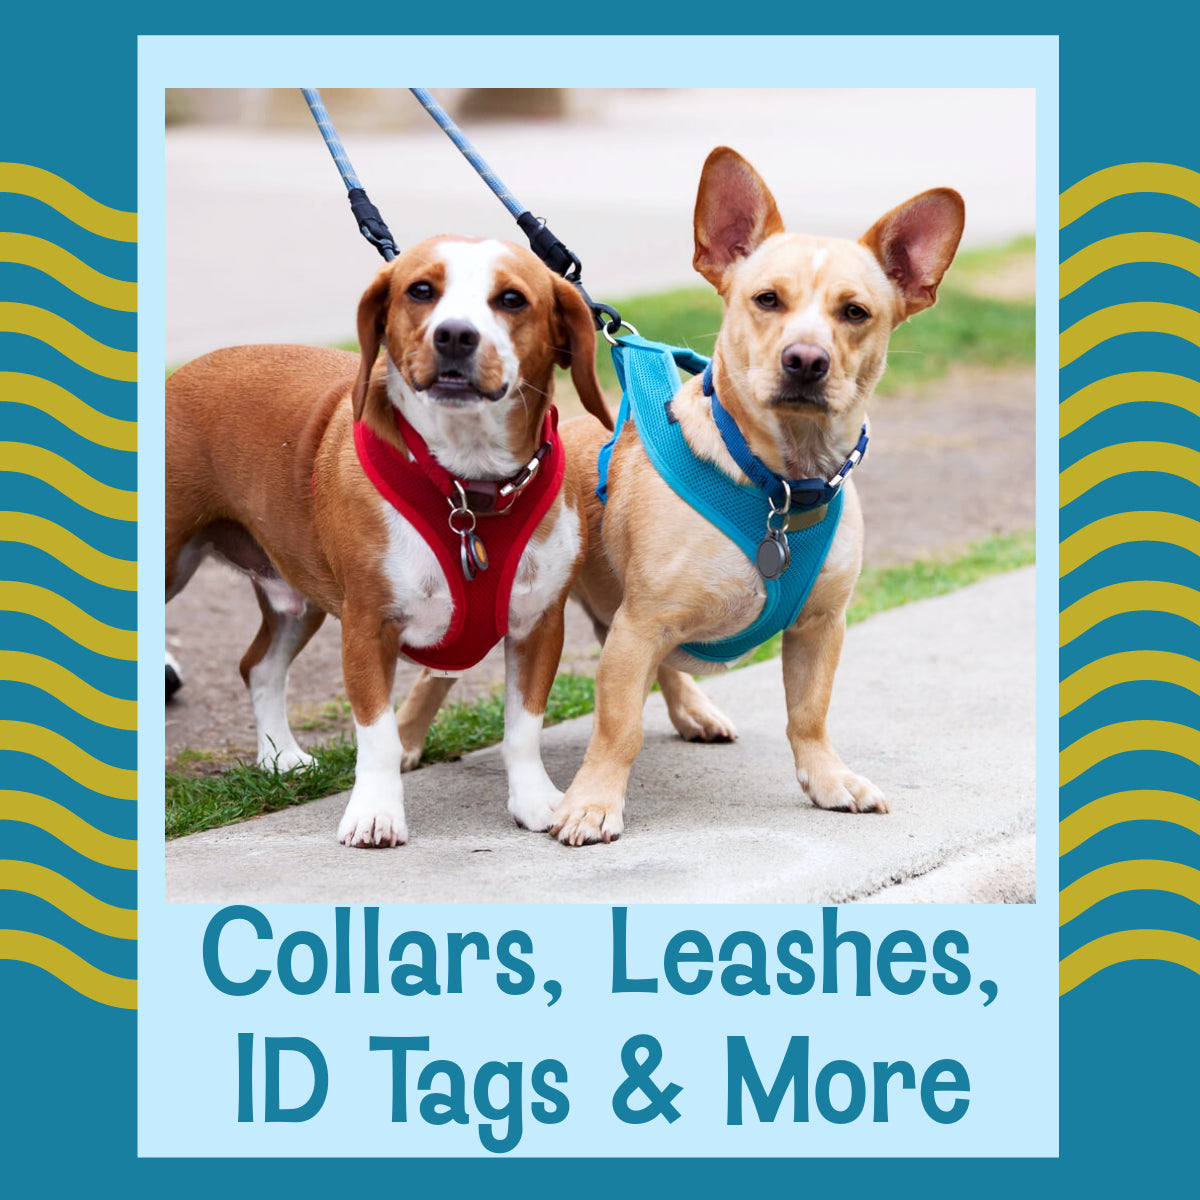 Collars, Leashes, ID Tags & More